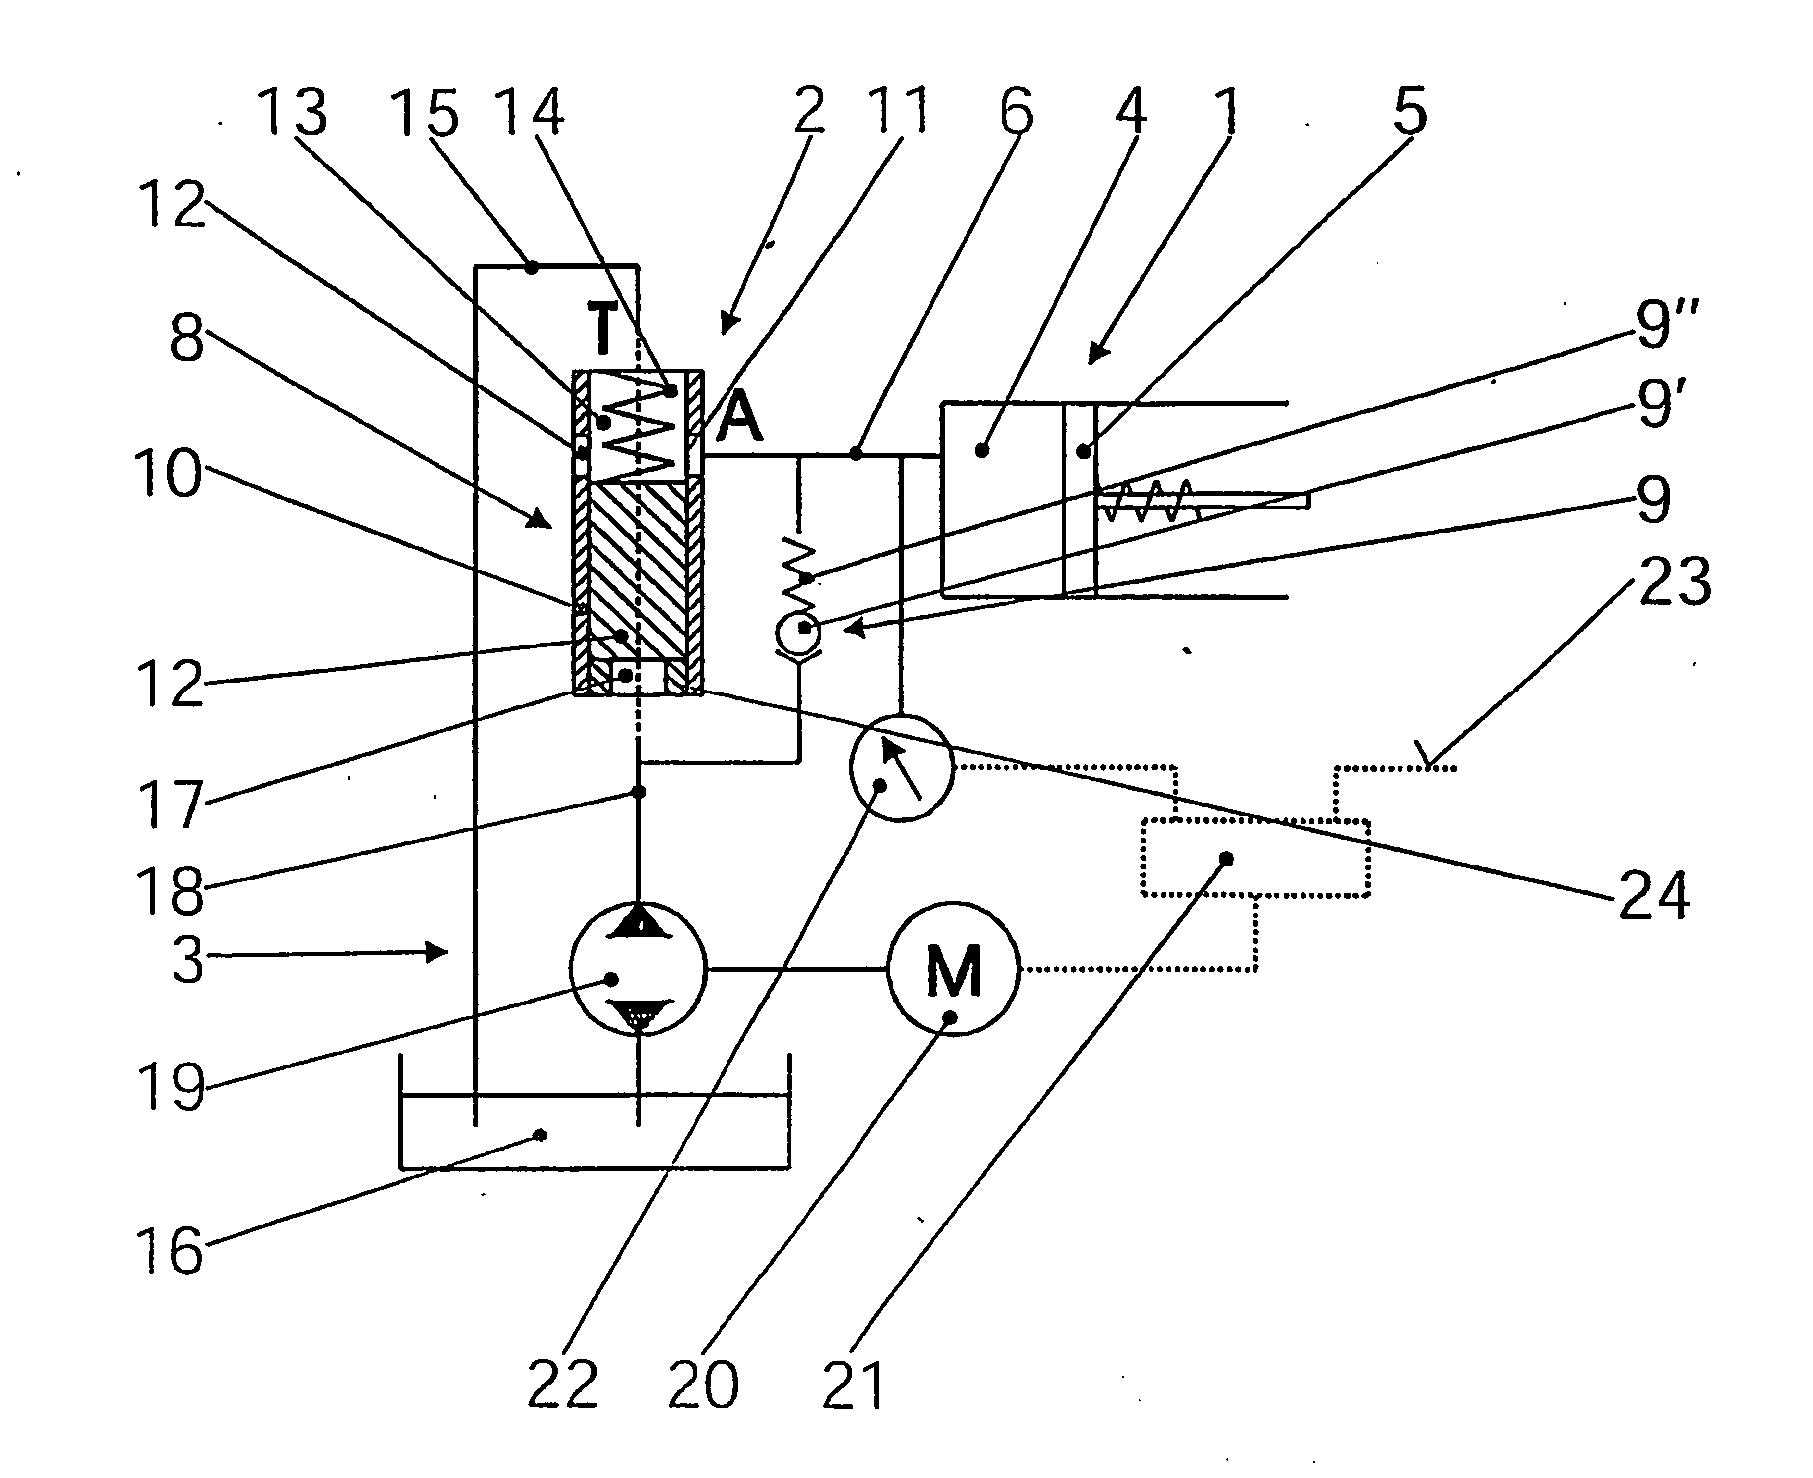 Simple action actuator with a hydraulic fast-opening valve for controlling a clutch